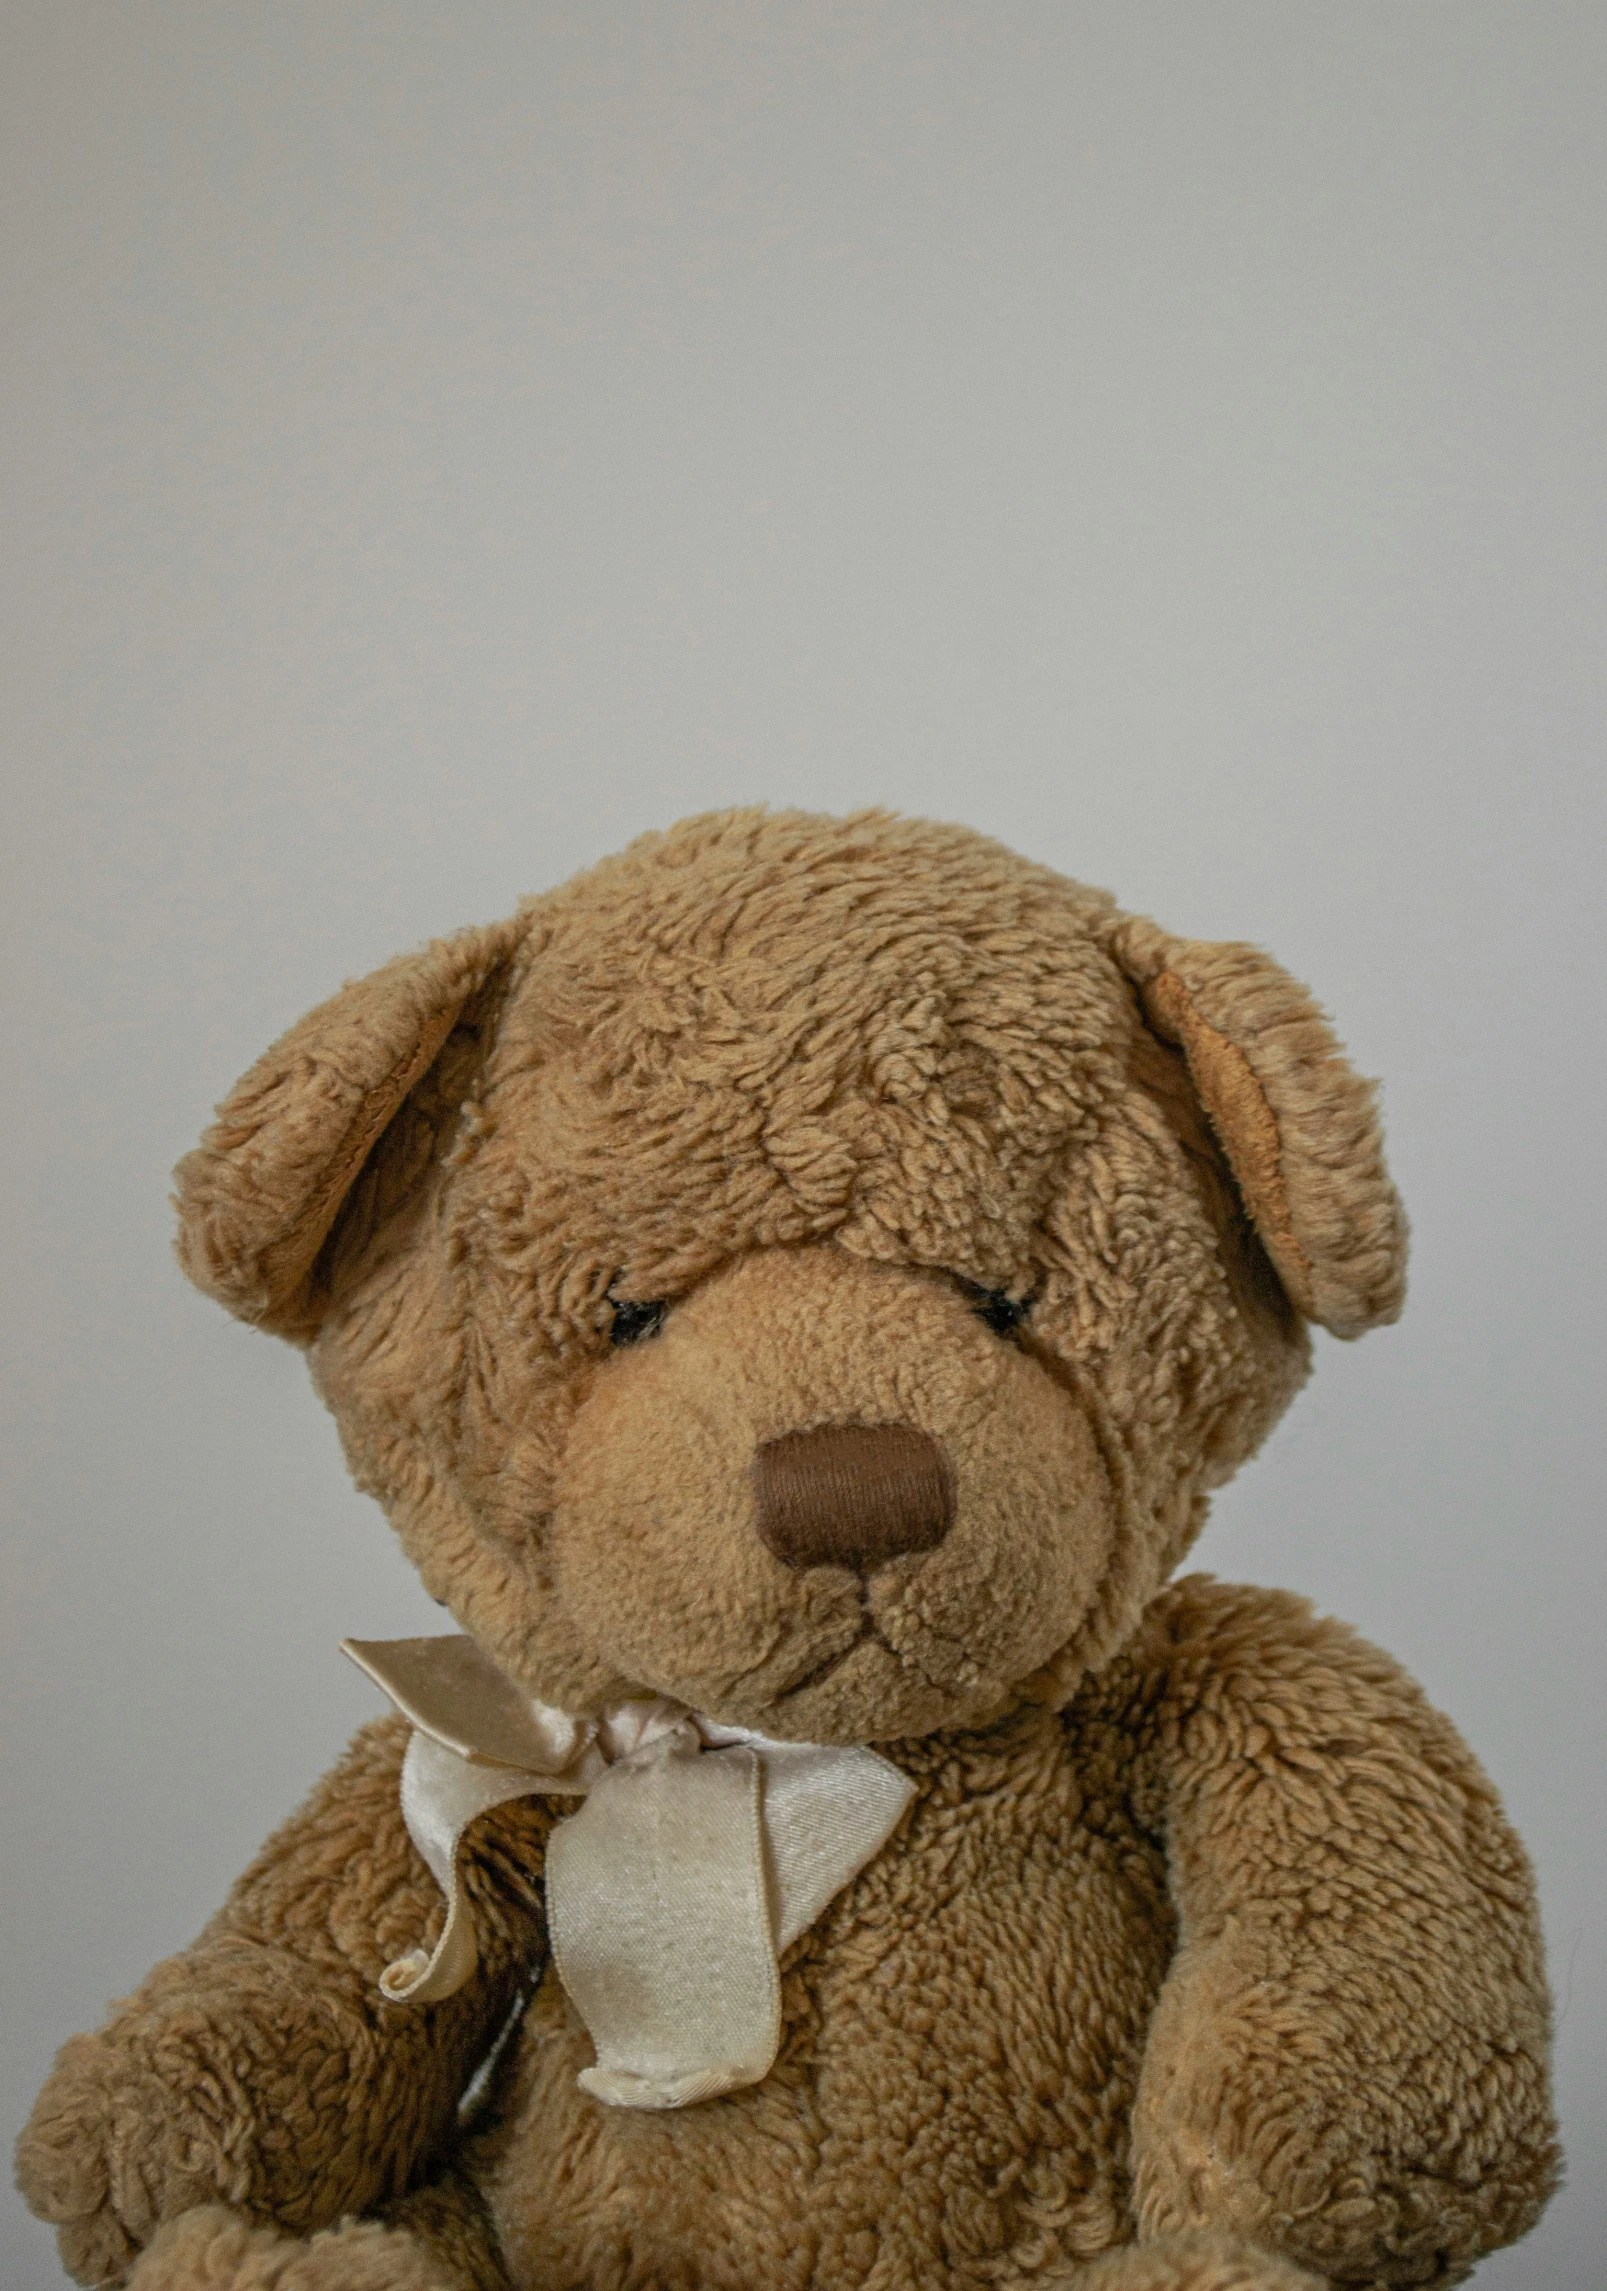 a brown teddy bear sitting up against a white background